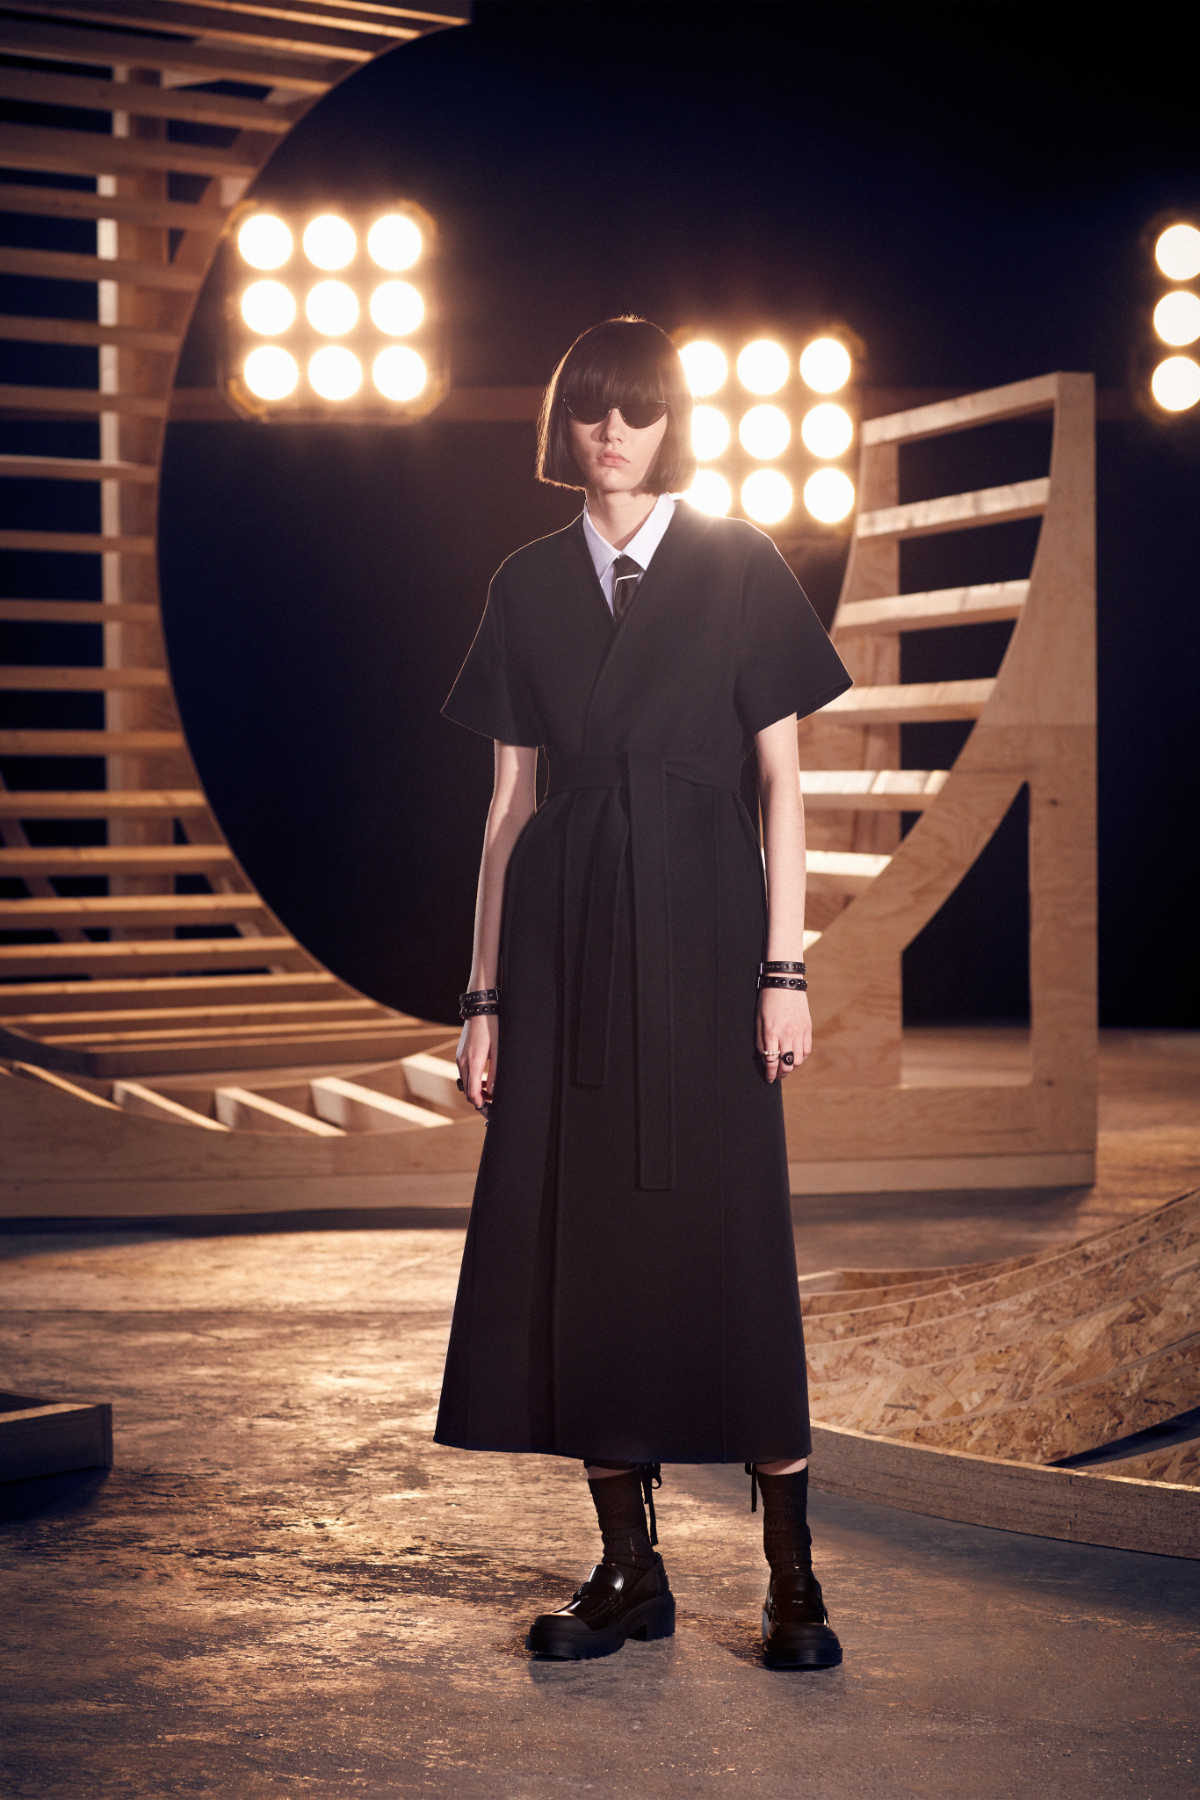 Dior Presents Its New Fall RTW 2022 Women's Collection